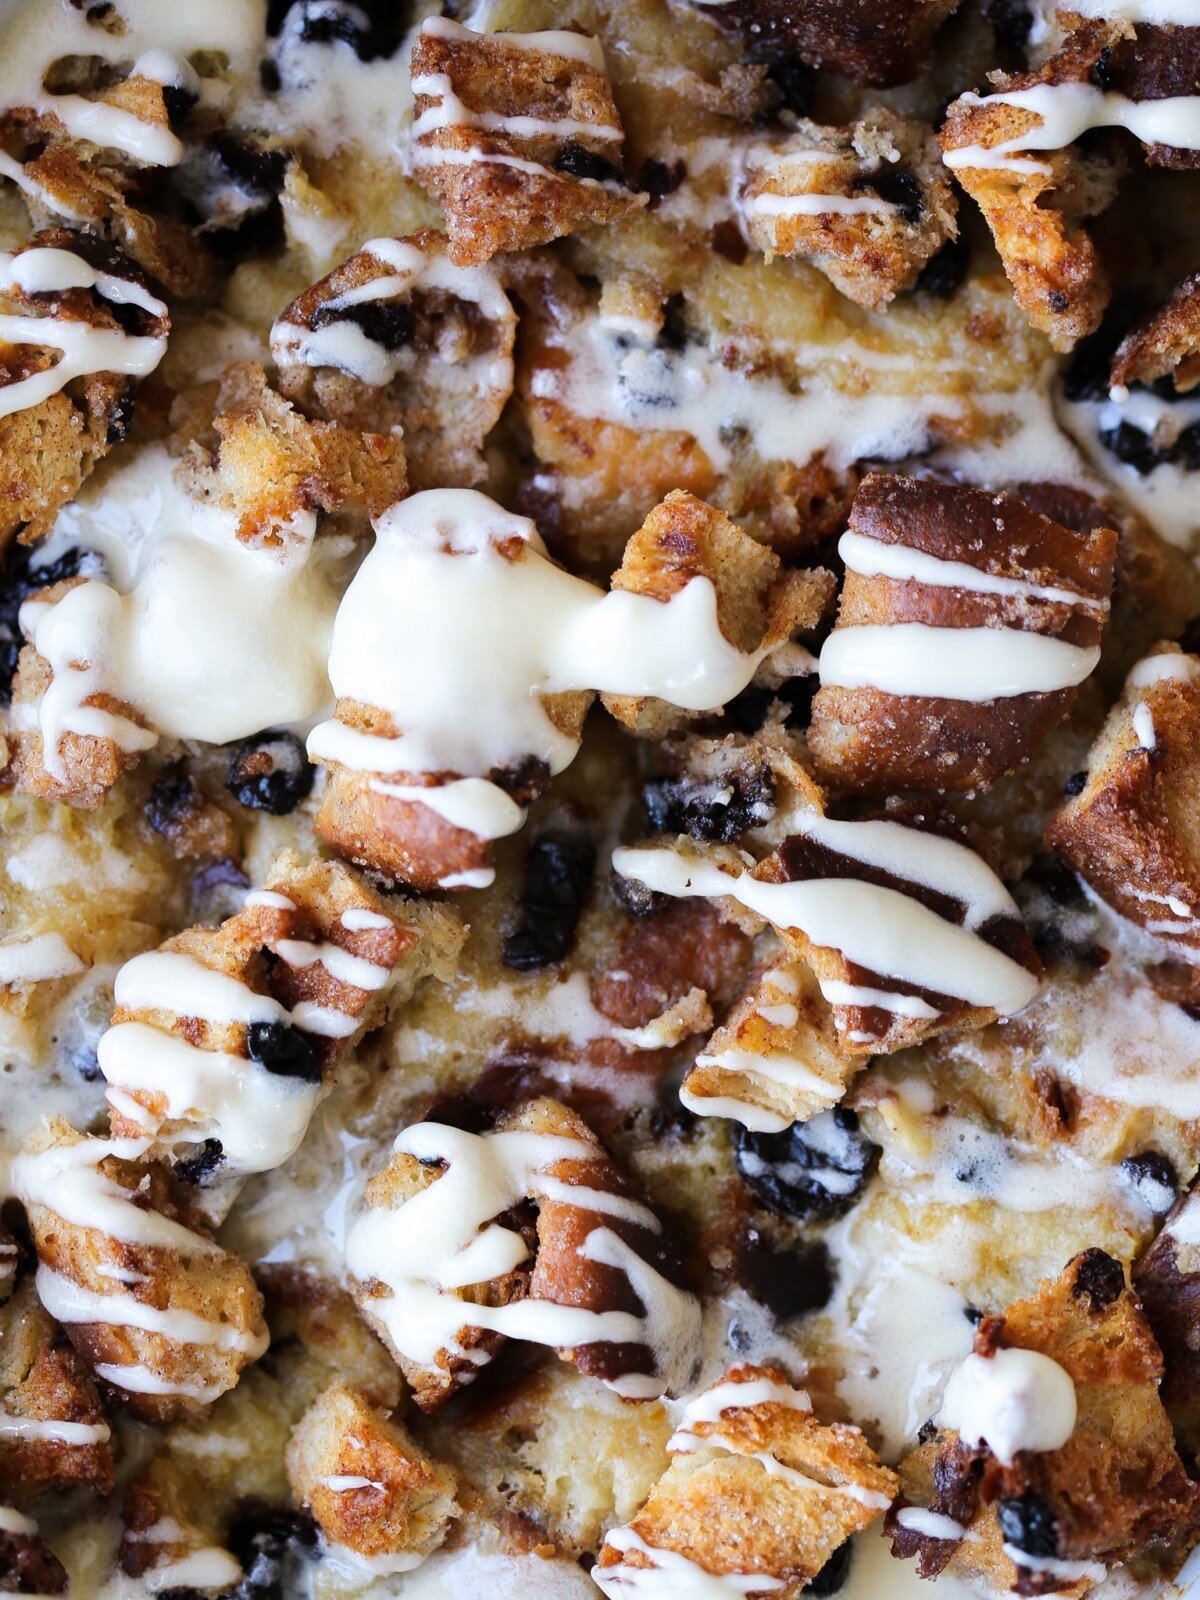 bread pudding with crunchy sugared topping and hard sauce in dish.